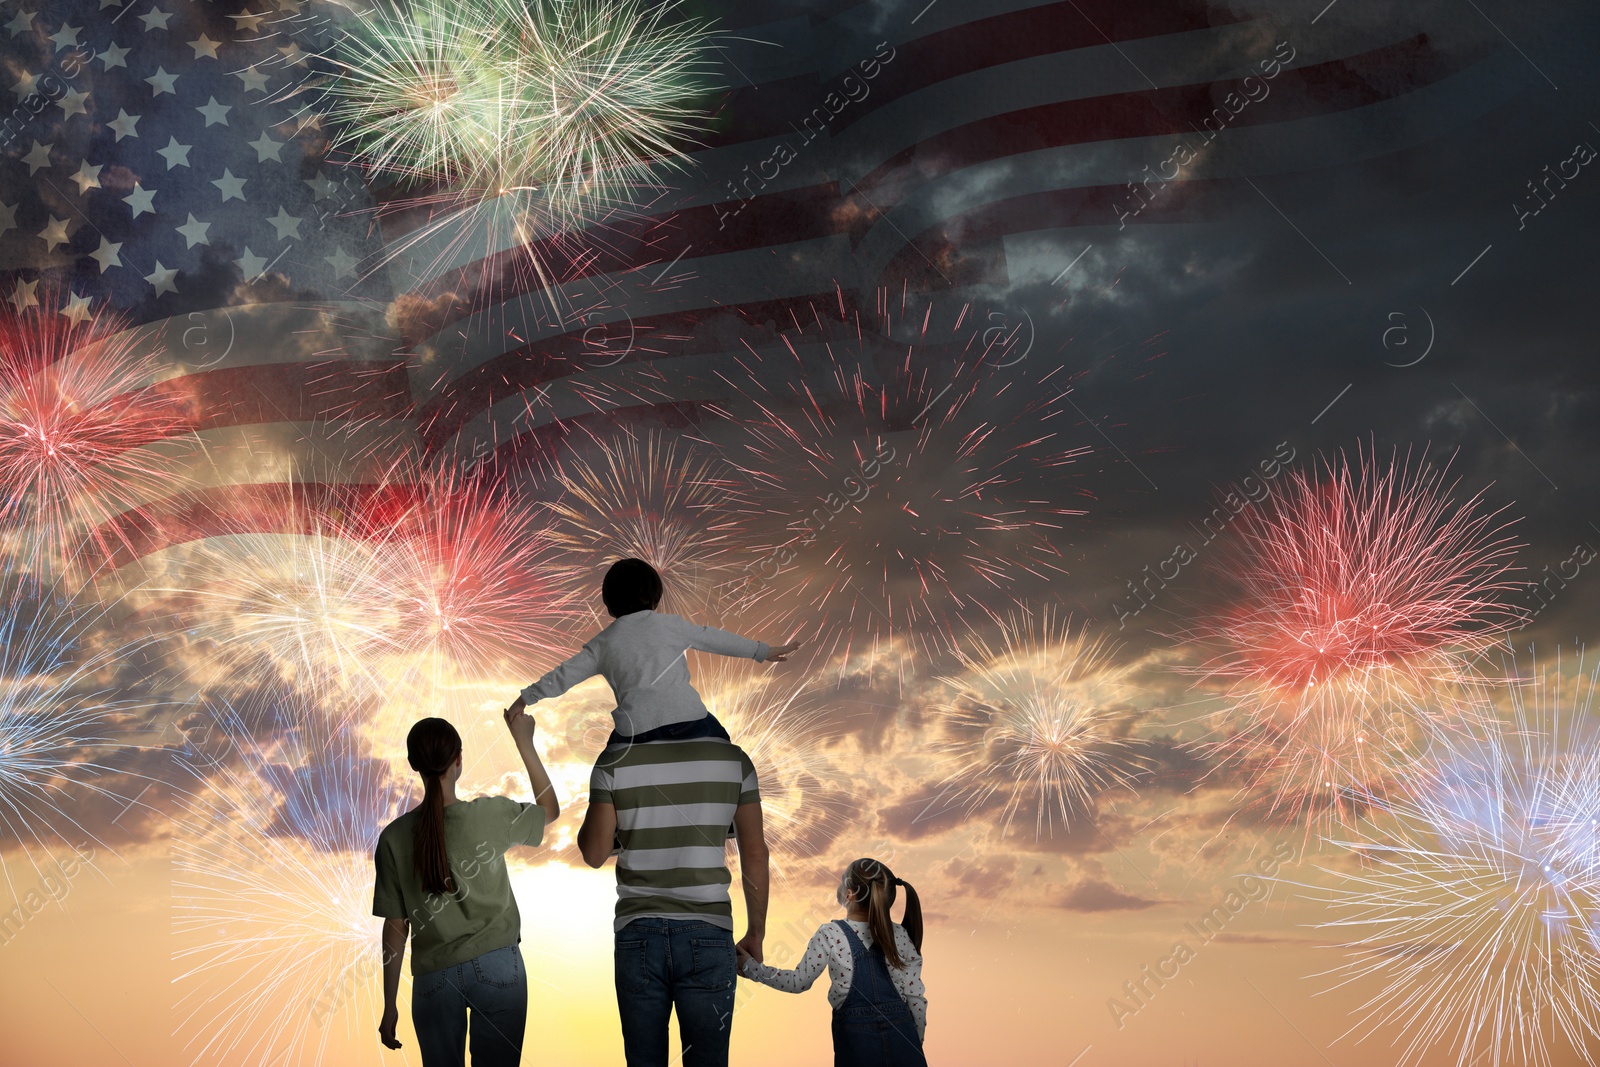 Image of 4th of July - Independence day of America. Family enjoying fireworks in sky. Double exposure with flag of United States